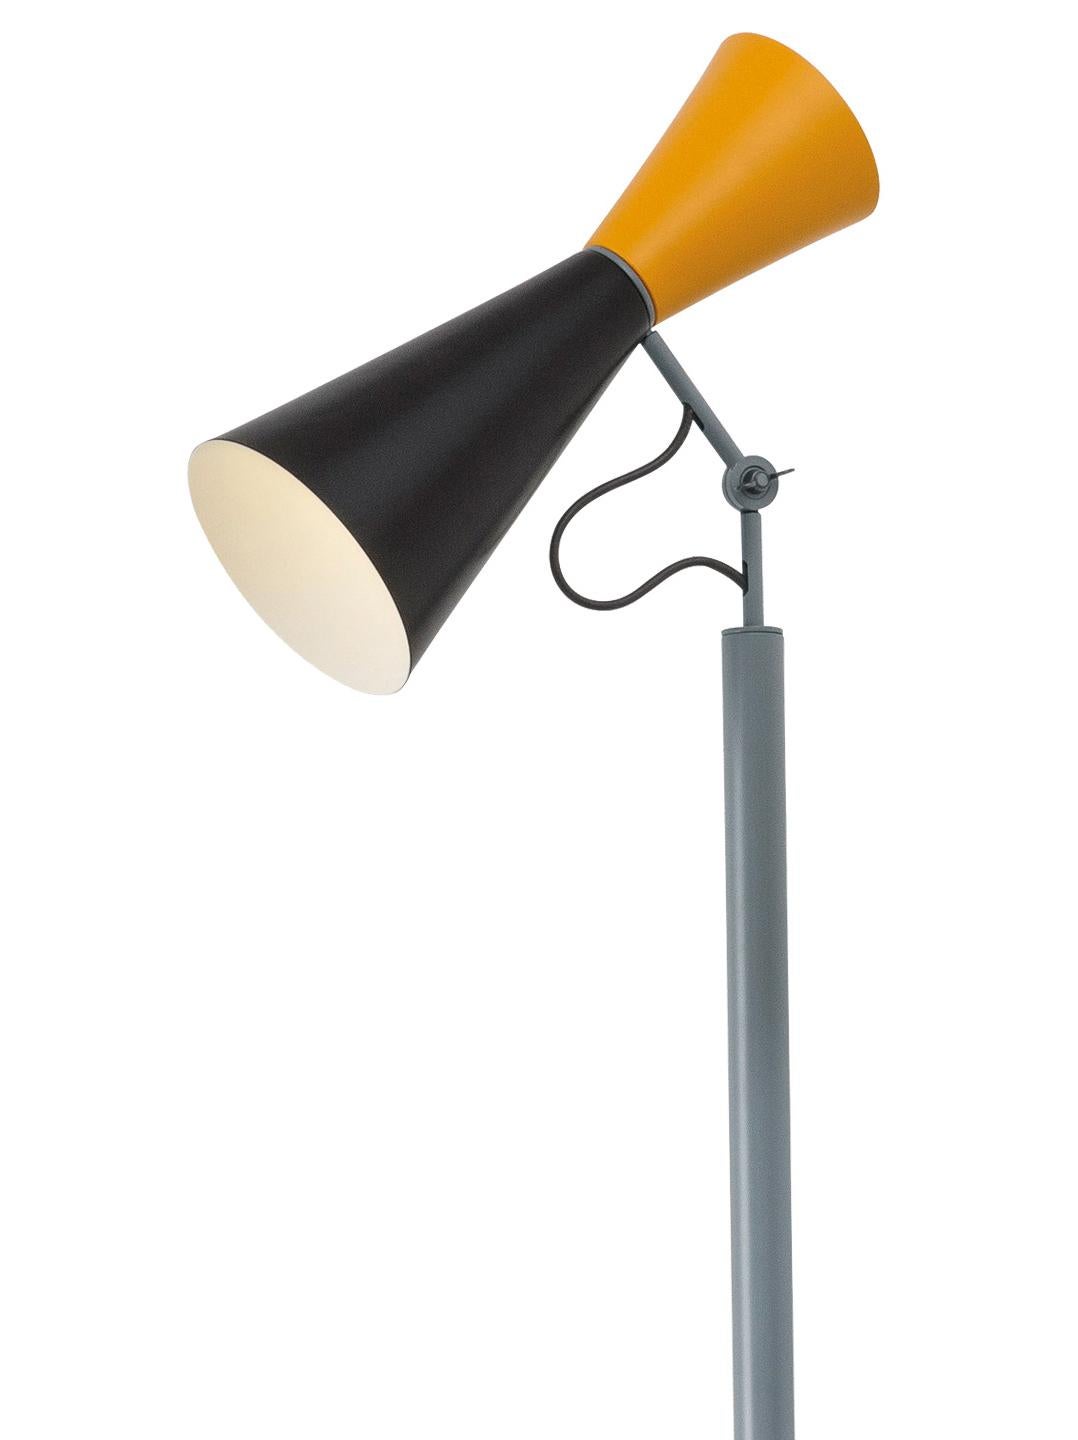 Le Corbusier 'Parliament' floor lamp for Nemo in black and yellow. 

Le Corbusier designed the Parliament lamp for the Chandigarh Parliament in India. This iconic floor lamp features a two-way light source, with a dual-cone design executed in